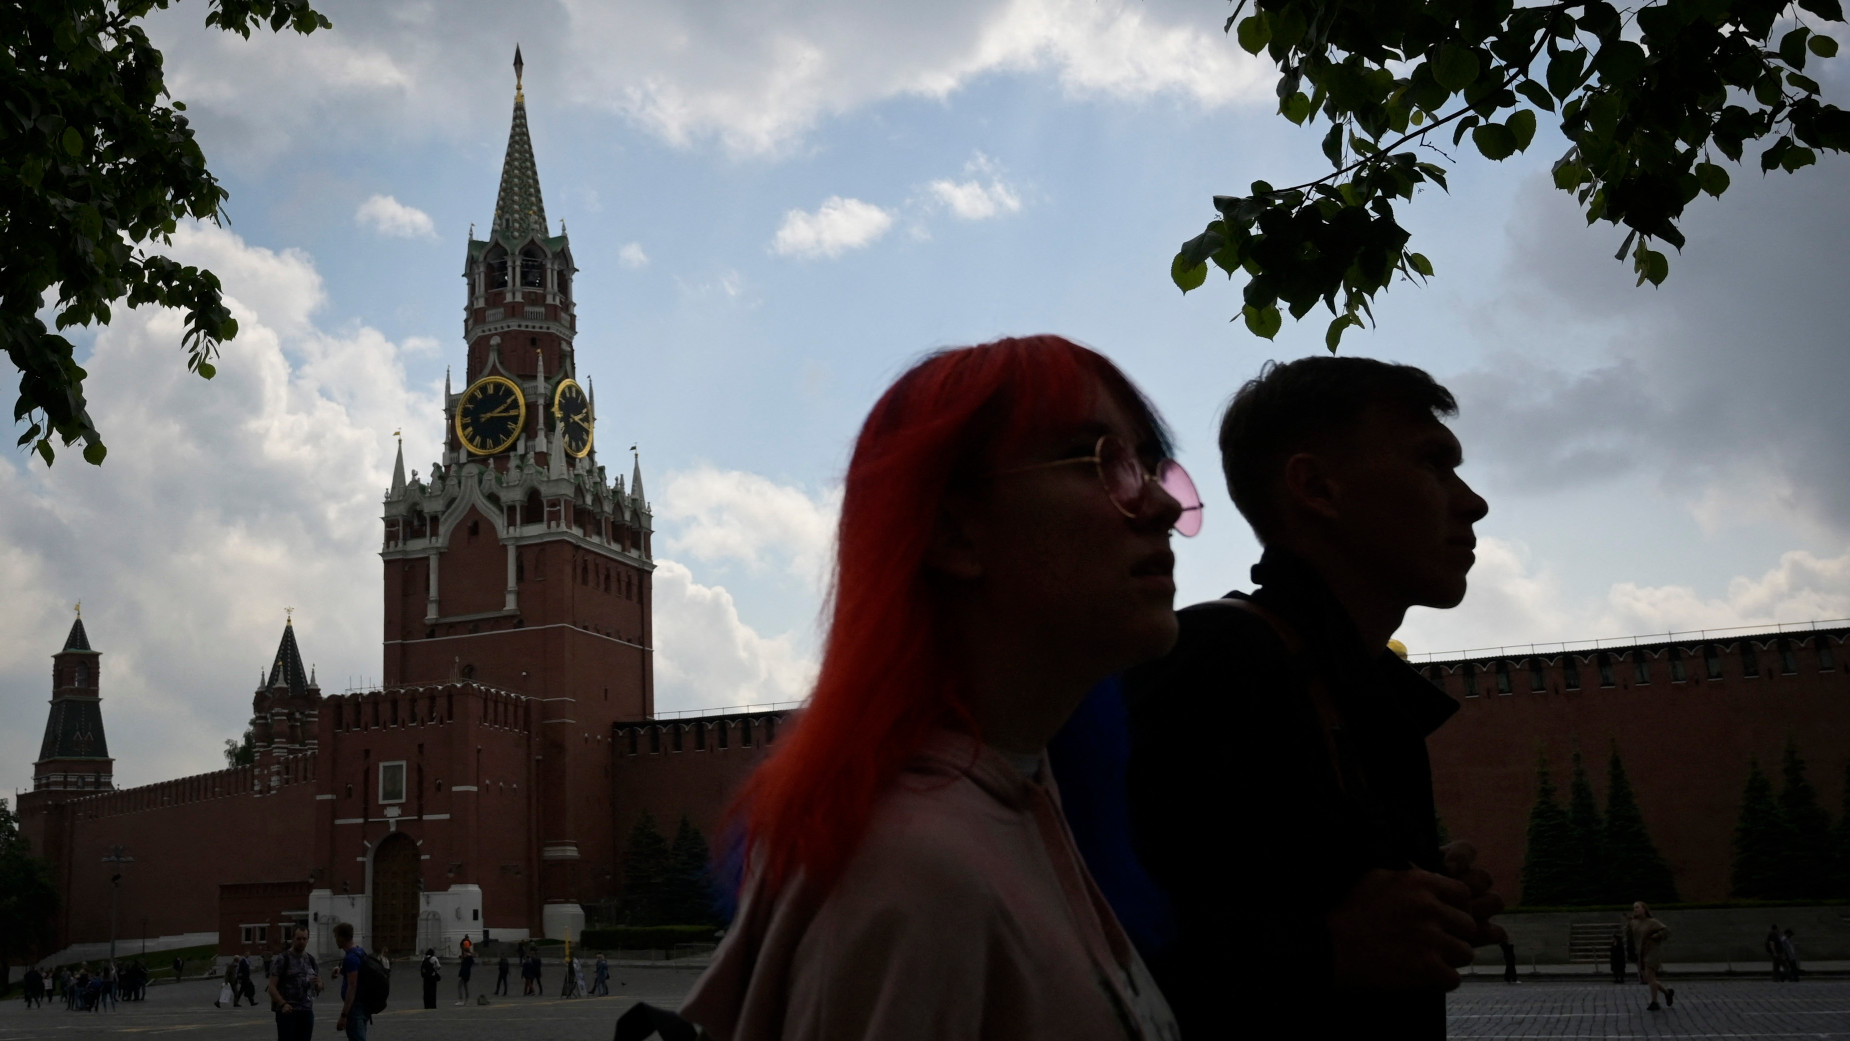 Young people walk across the Red Square in Moscow on 27 May 2021 (AFP/Natalia Kolesnikova)